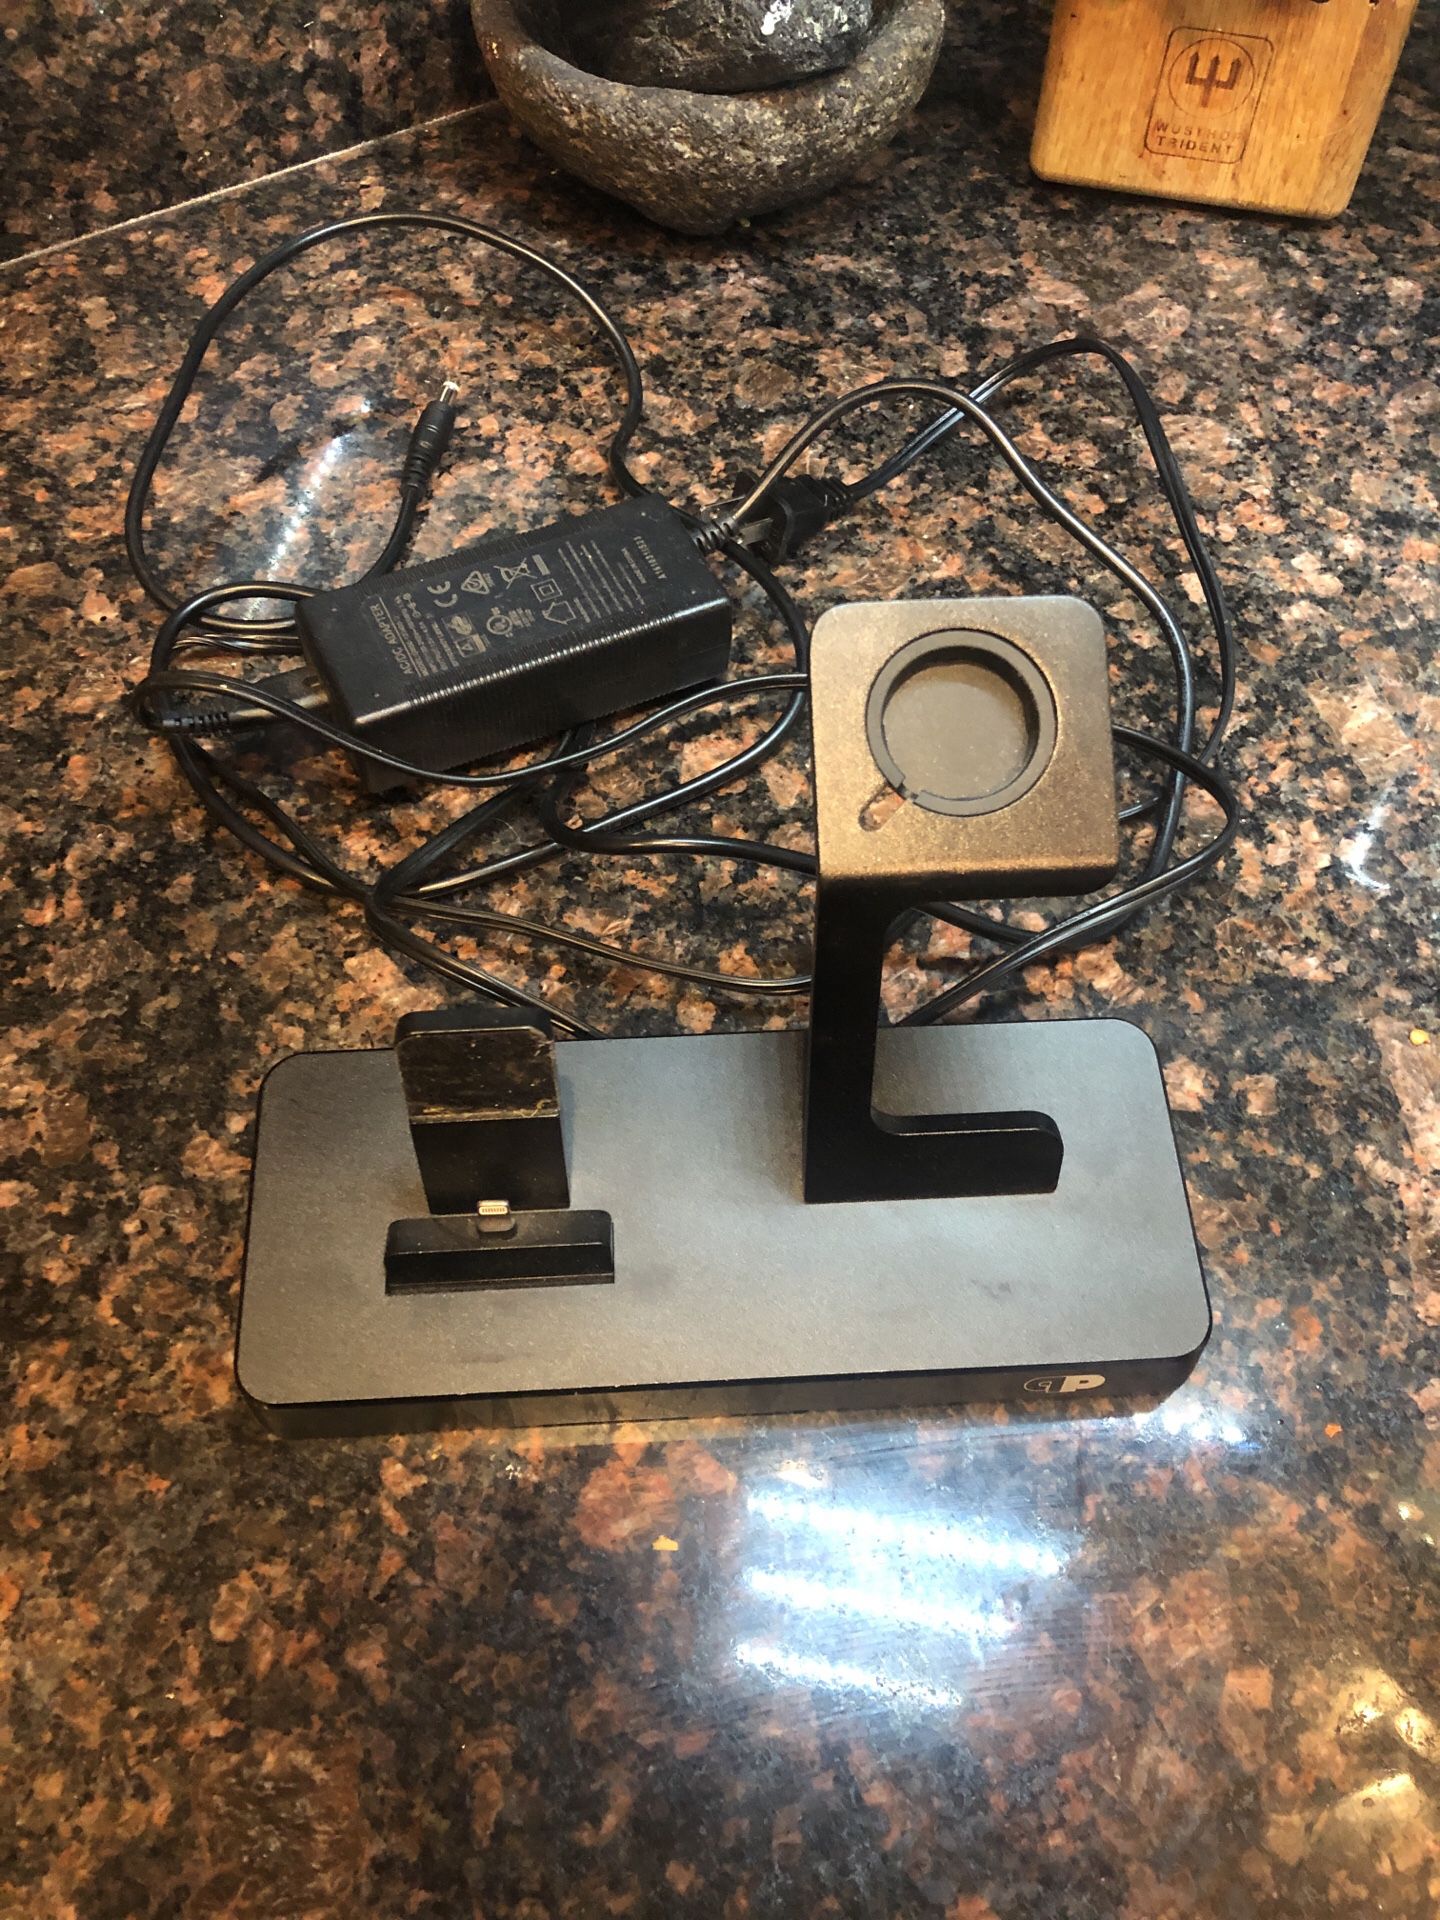 iPhone and Apple watch night stand charger with 2usb ports on the back